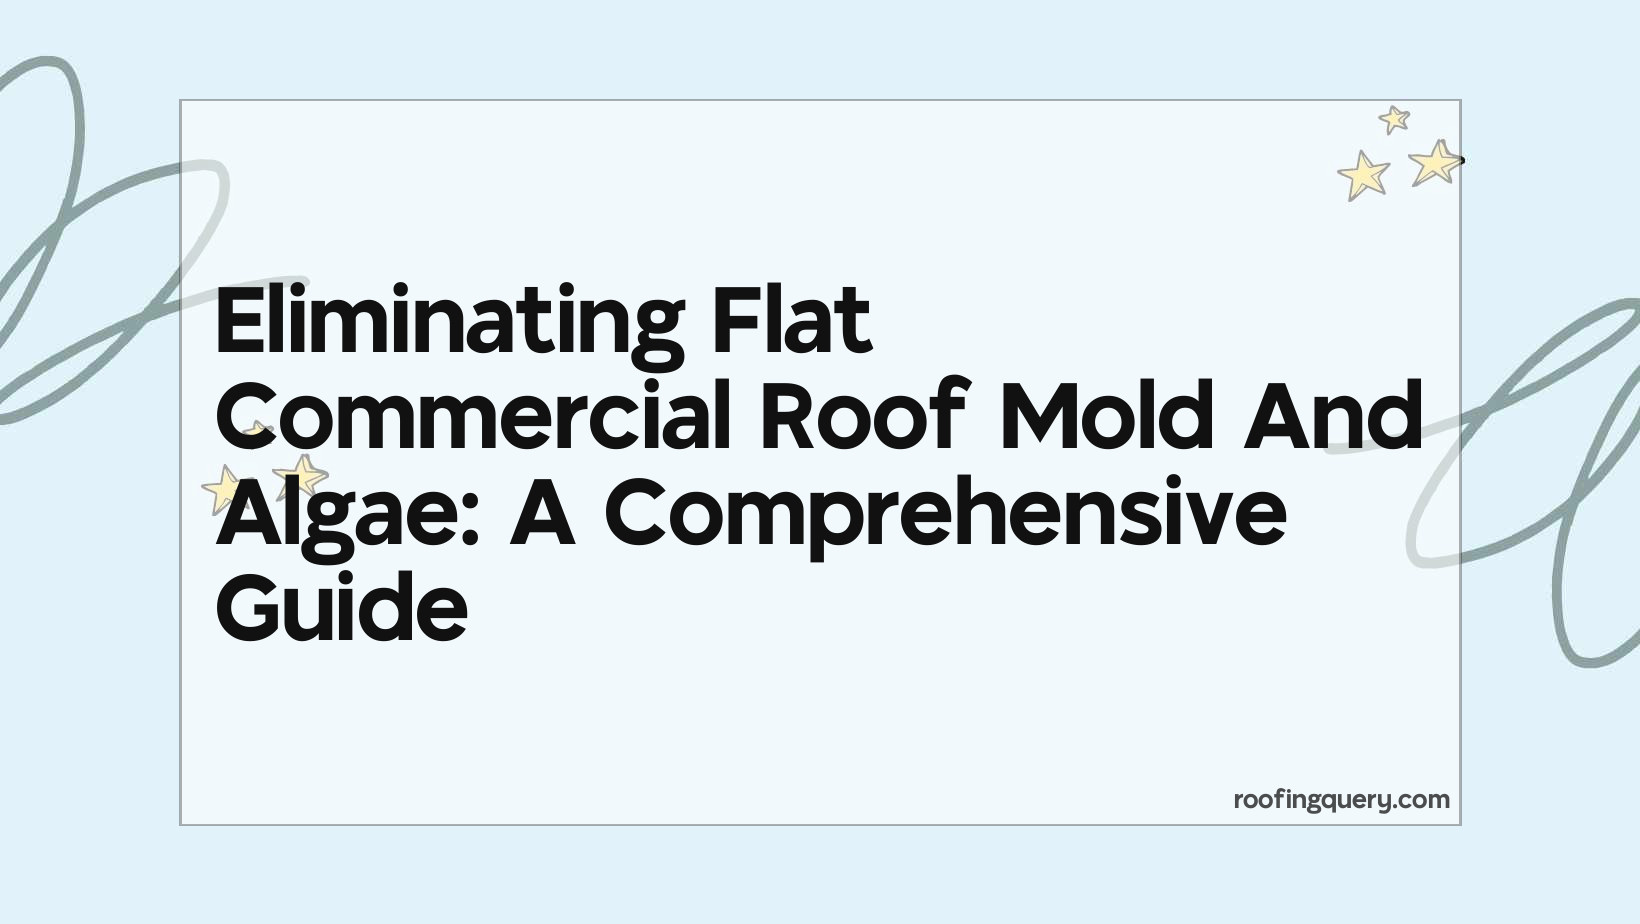 Eliminating Flat Commercial Roof Mold And Algae: A Comprehensive Guide